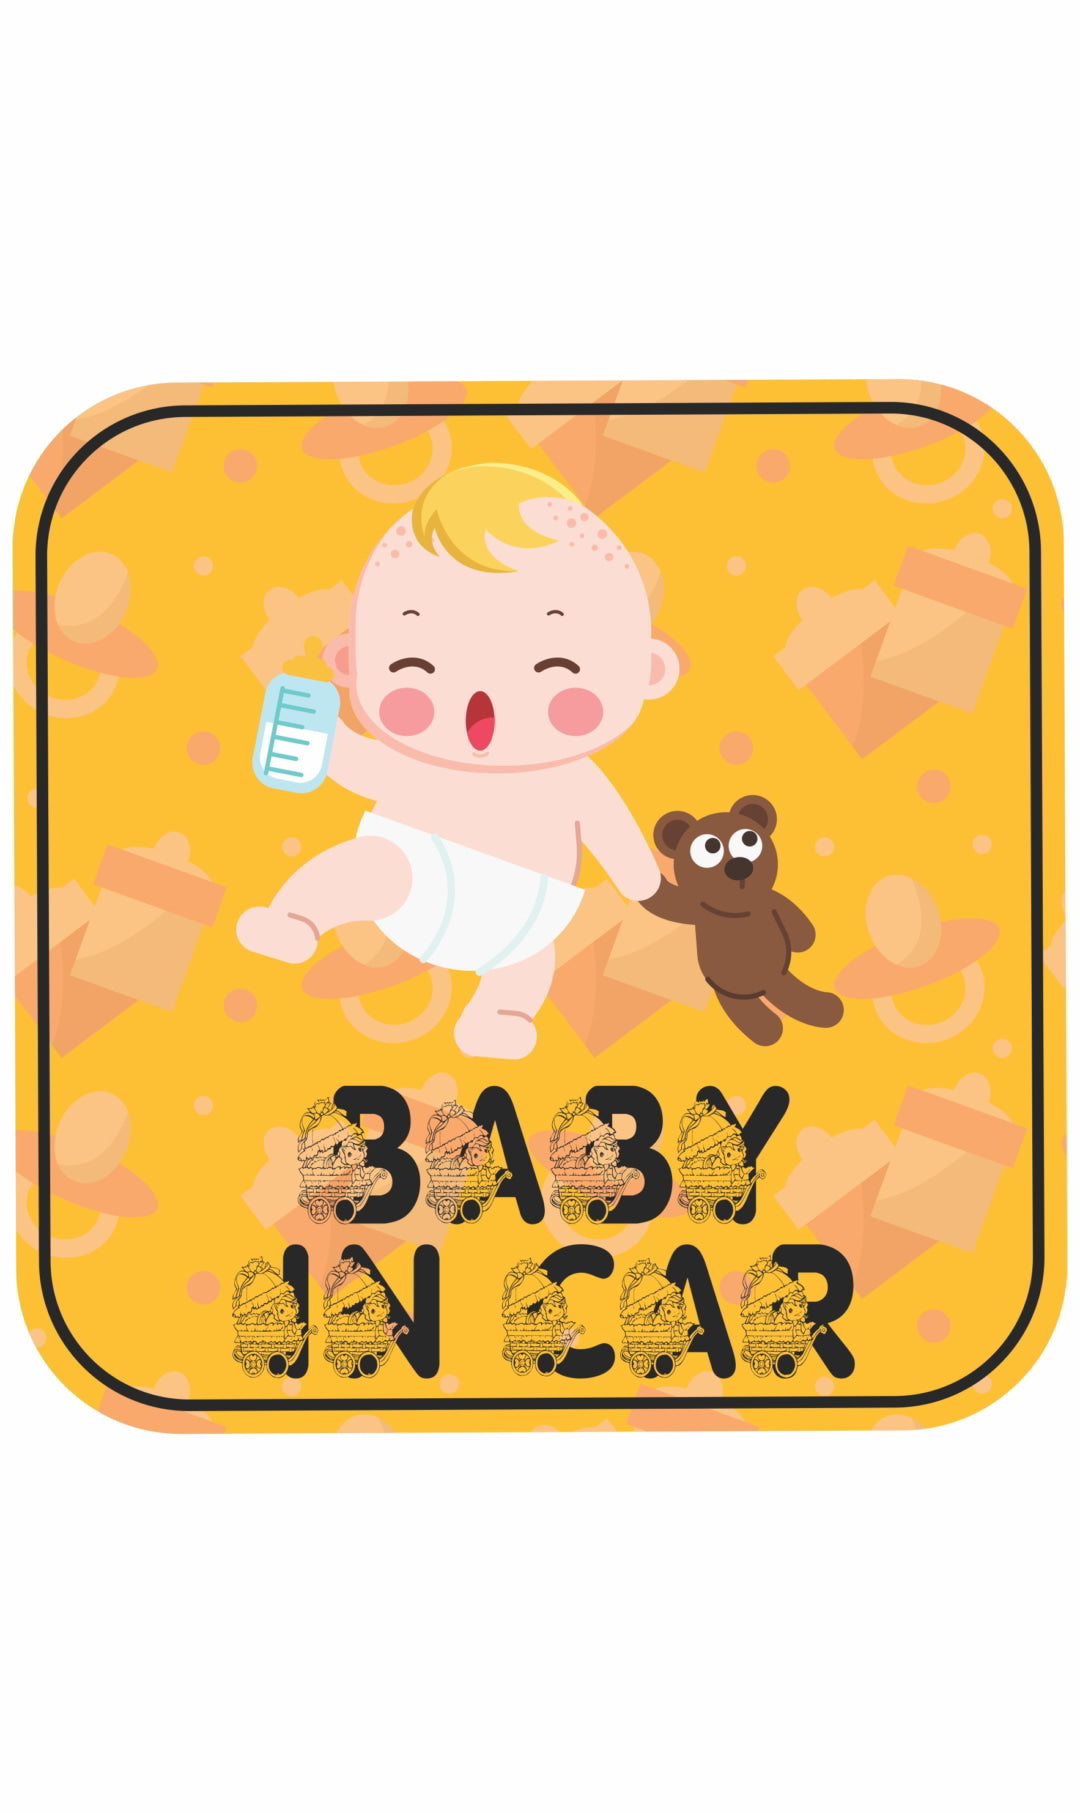 Baby in Car Decal Sticker(2pc)_c21